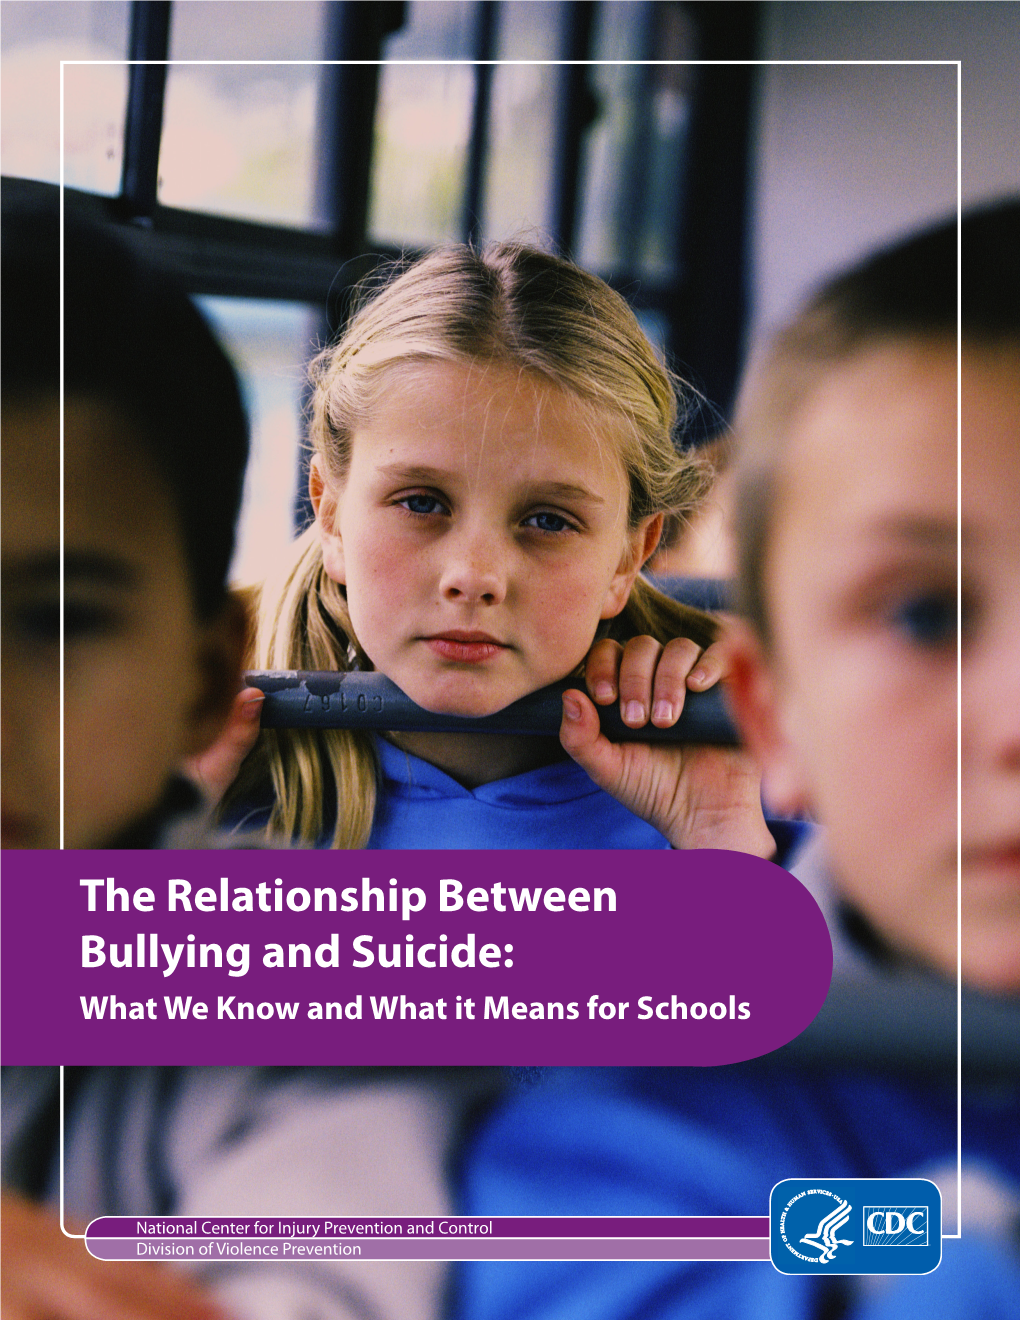 The Relationship Between Bullying and Suicide: What We Know and What It Means for Schools